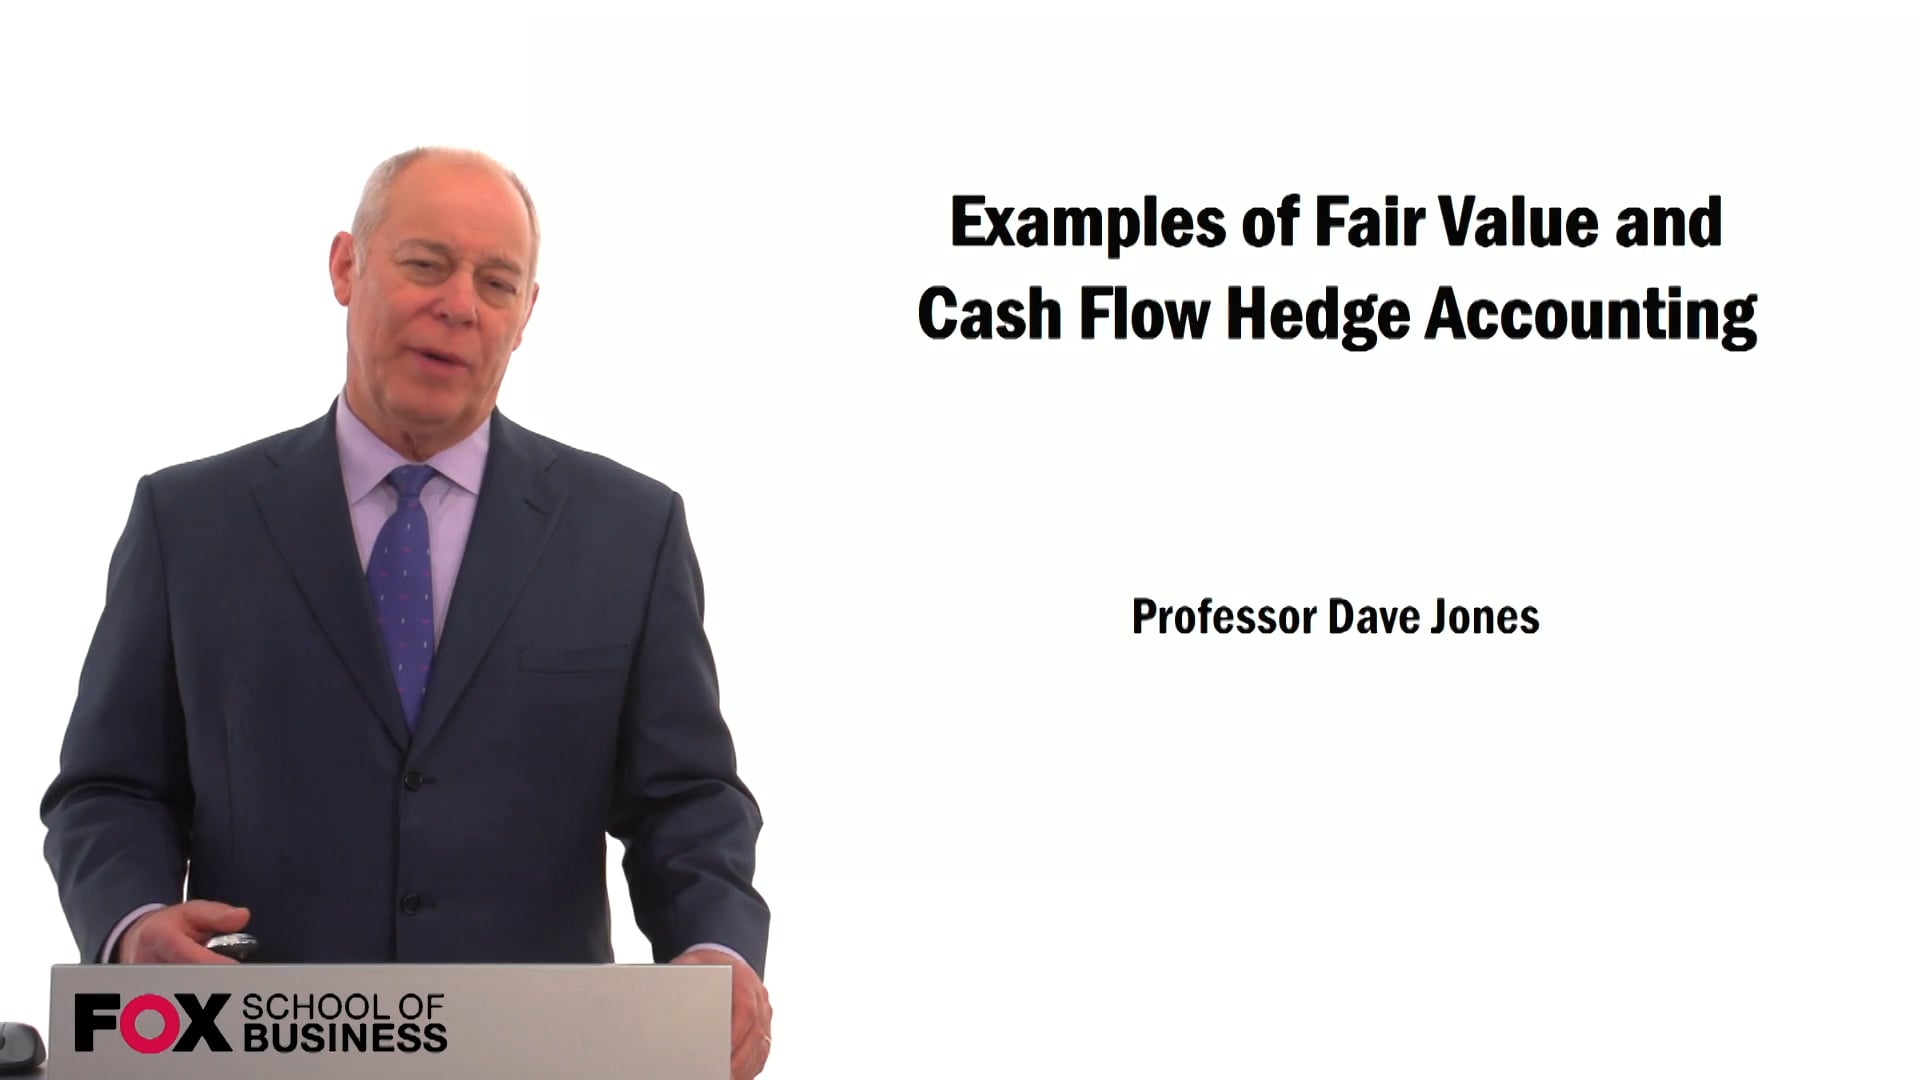 Examples of Fair Value and Cash Flow Hedge Accounting